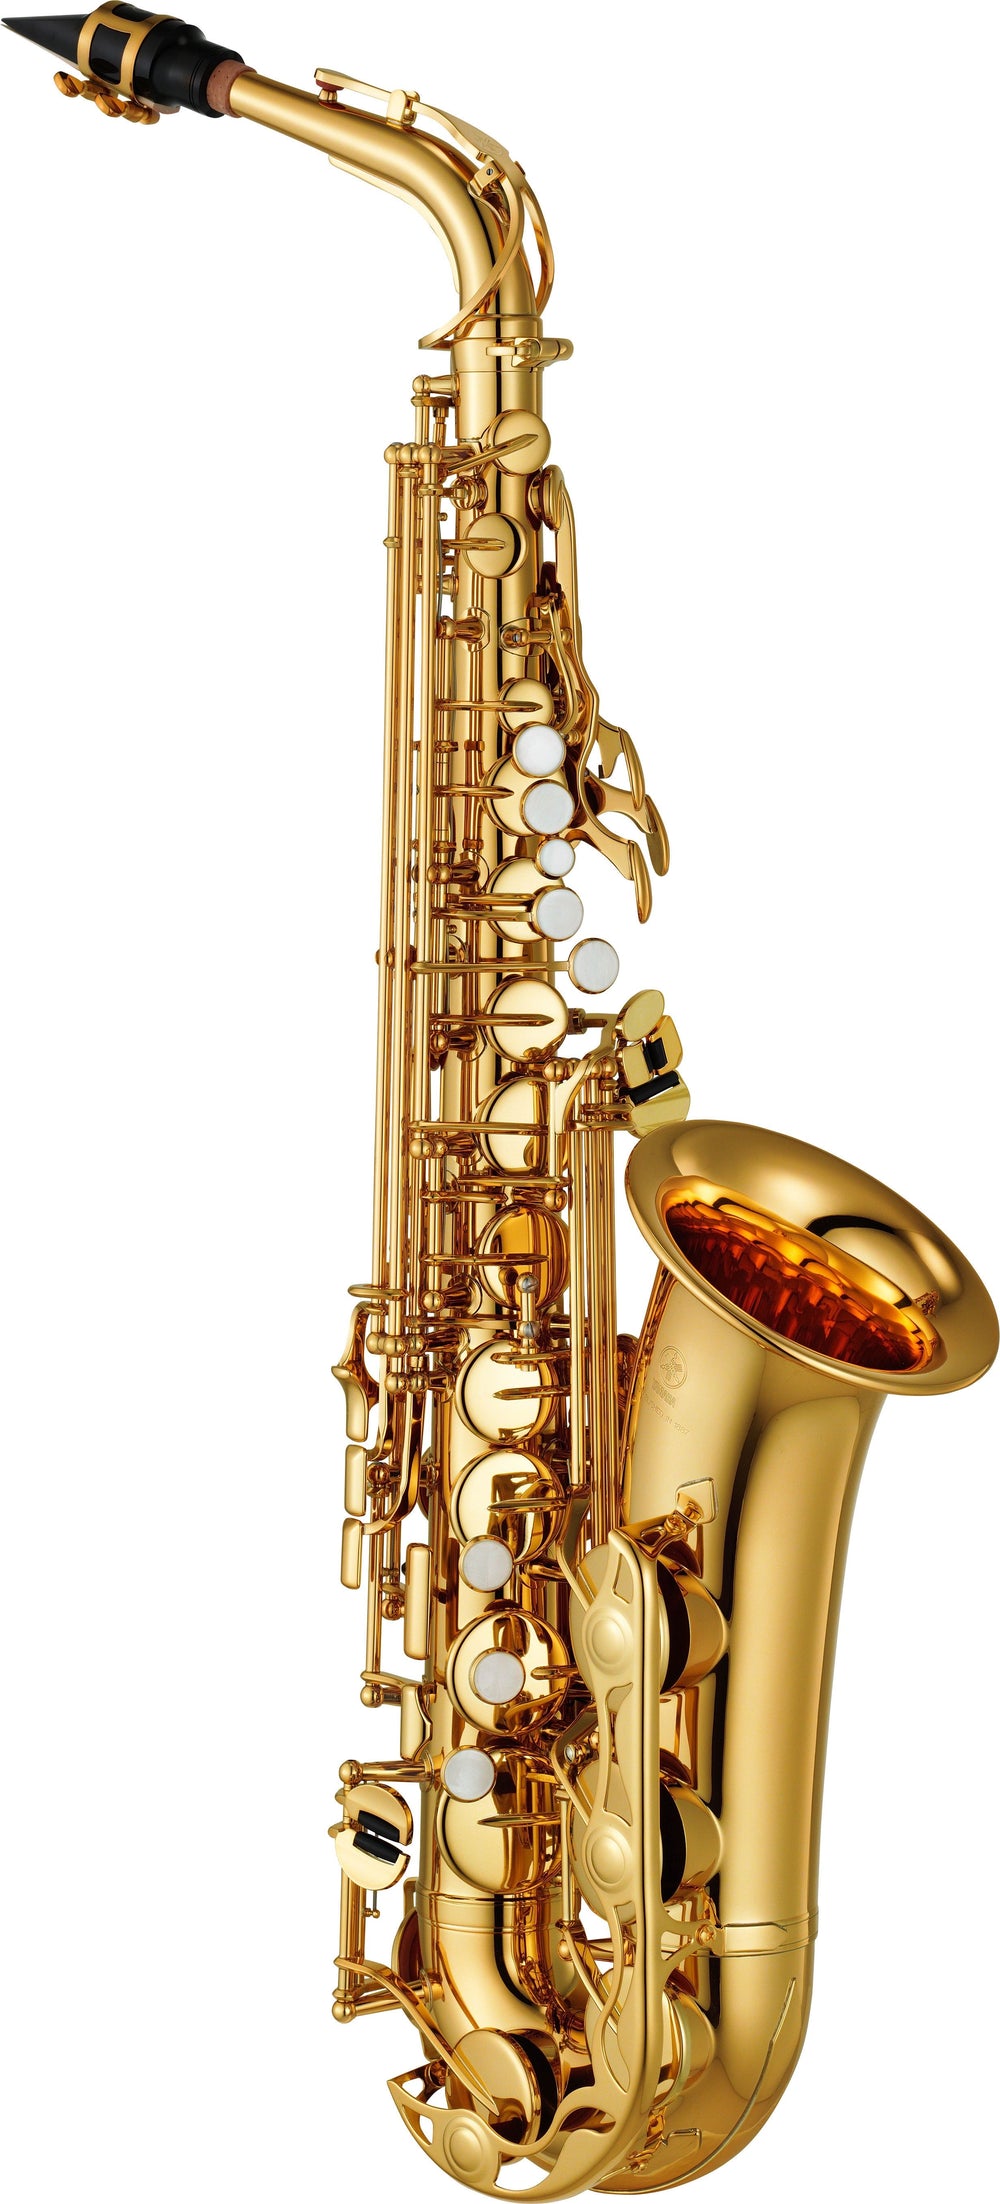 Yamaha YAS280 Alto Saxophone High F# key, front F key. Includes backpack case. Gold lacquer.-Buzz Music